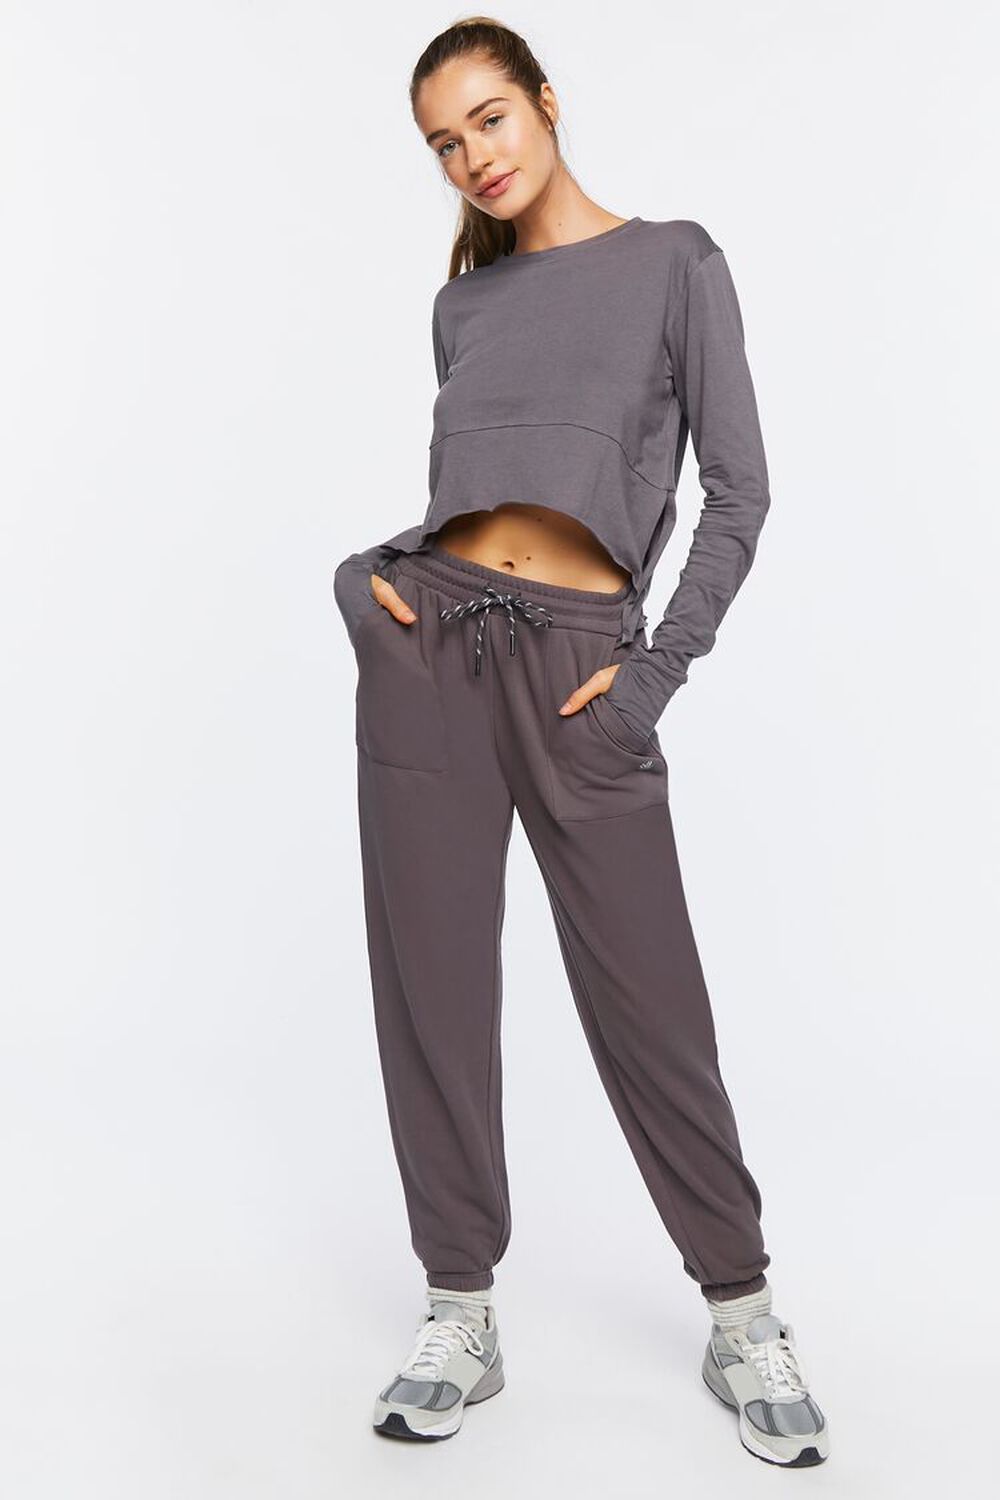 CHARCOAL Active French Terry Joggers, image 1